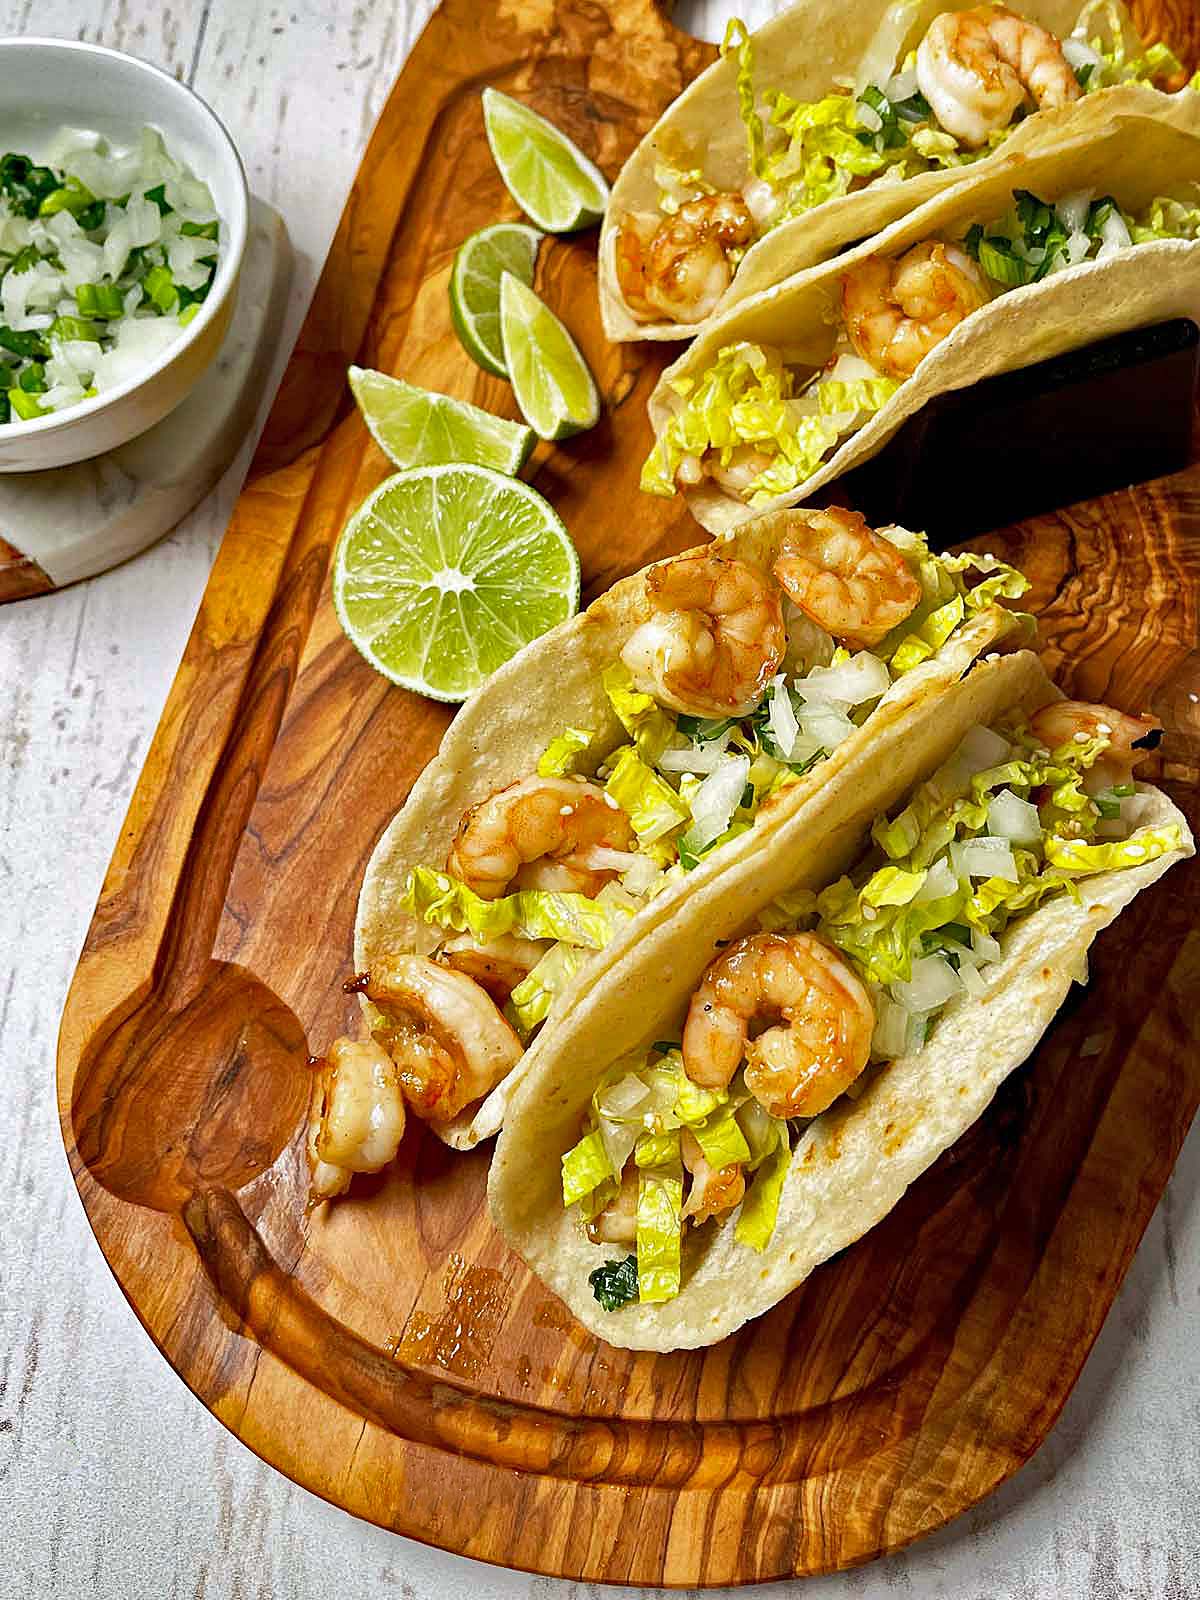 Picture of assembled Spicy Korean BBQ Shrimp Tacos on a wooden board.